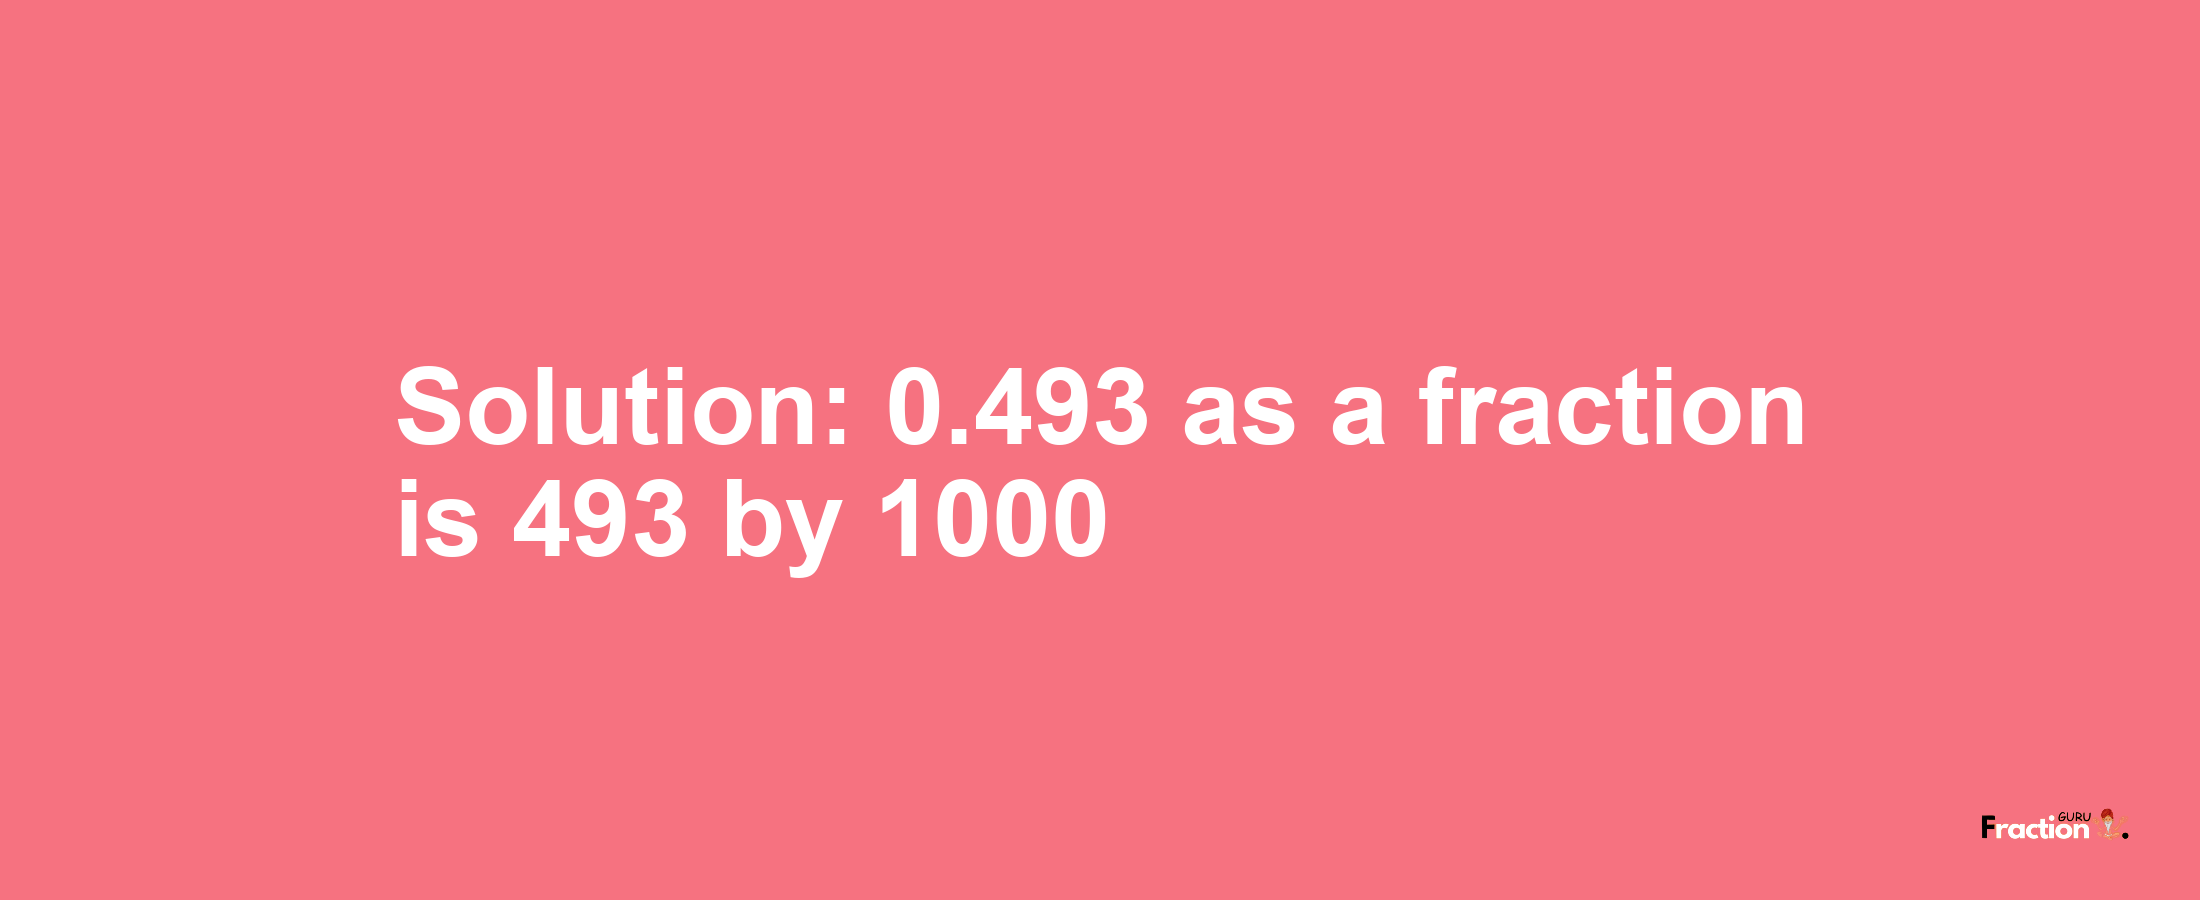 Solution:0.493 as a fraction is 493/1000